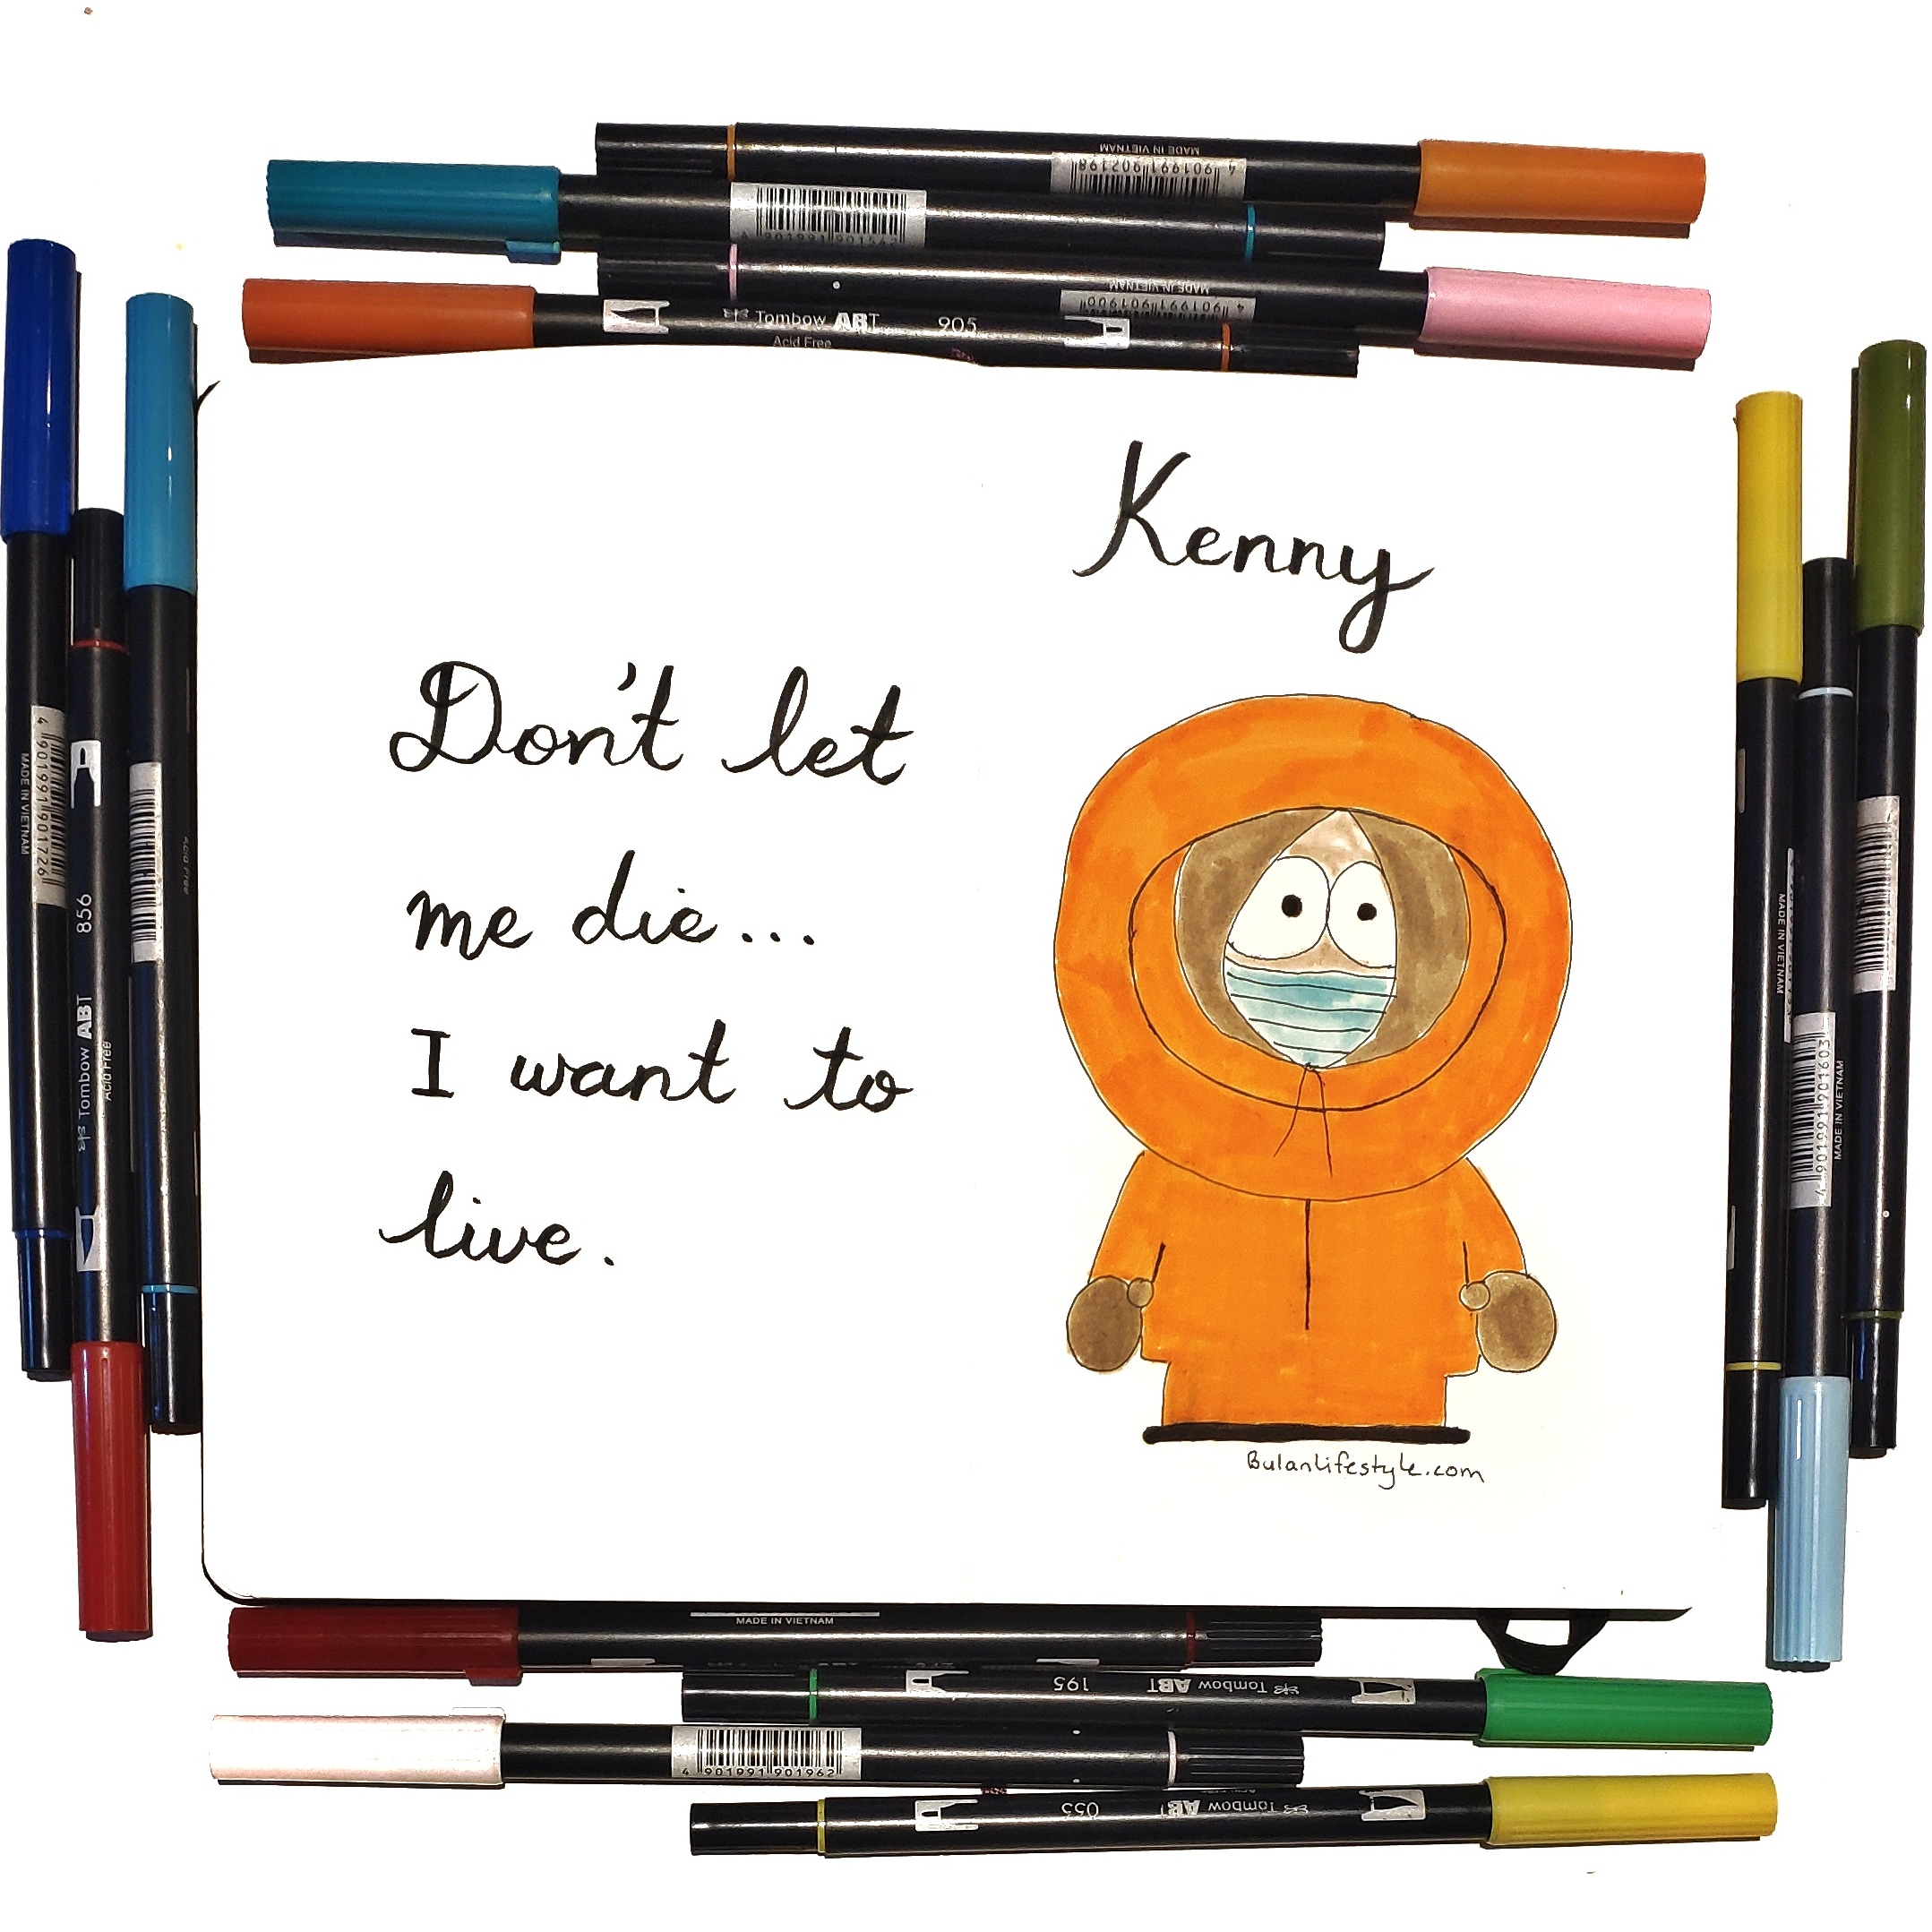 Kenny from South park